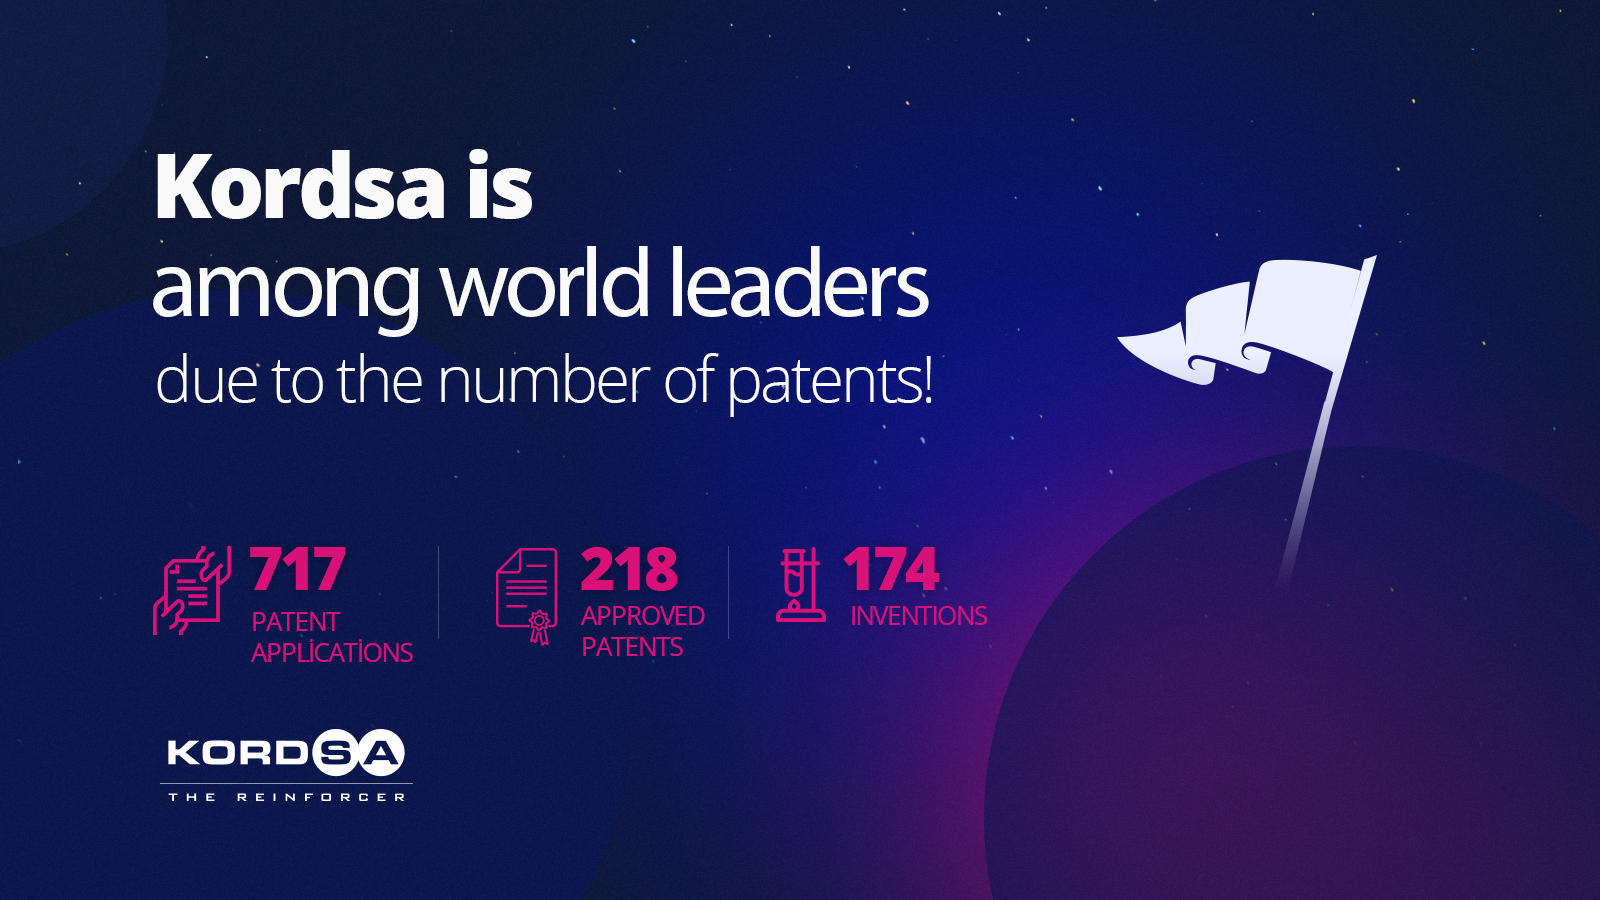 Kordsa is among the global leaders in industrial textiles with its number of patents